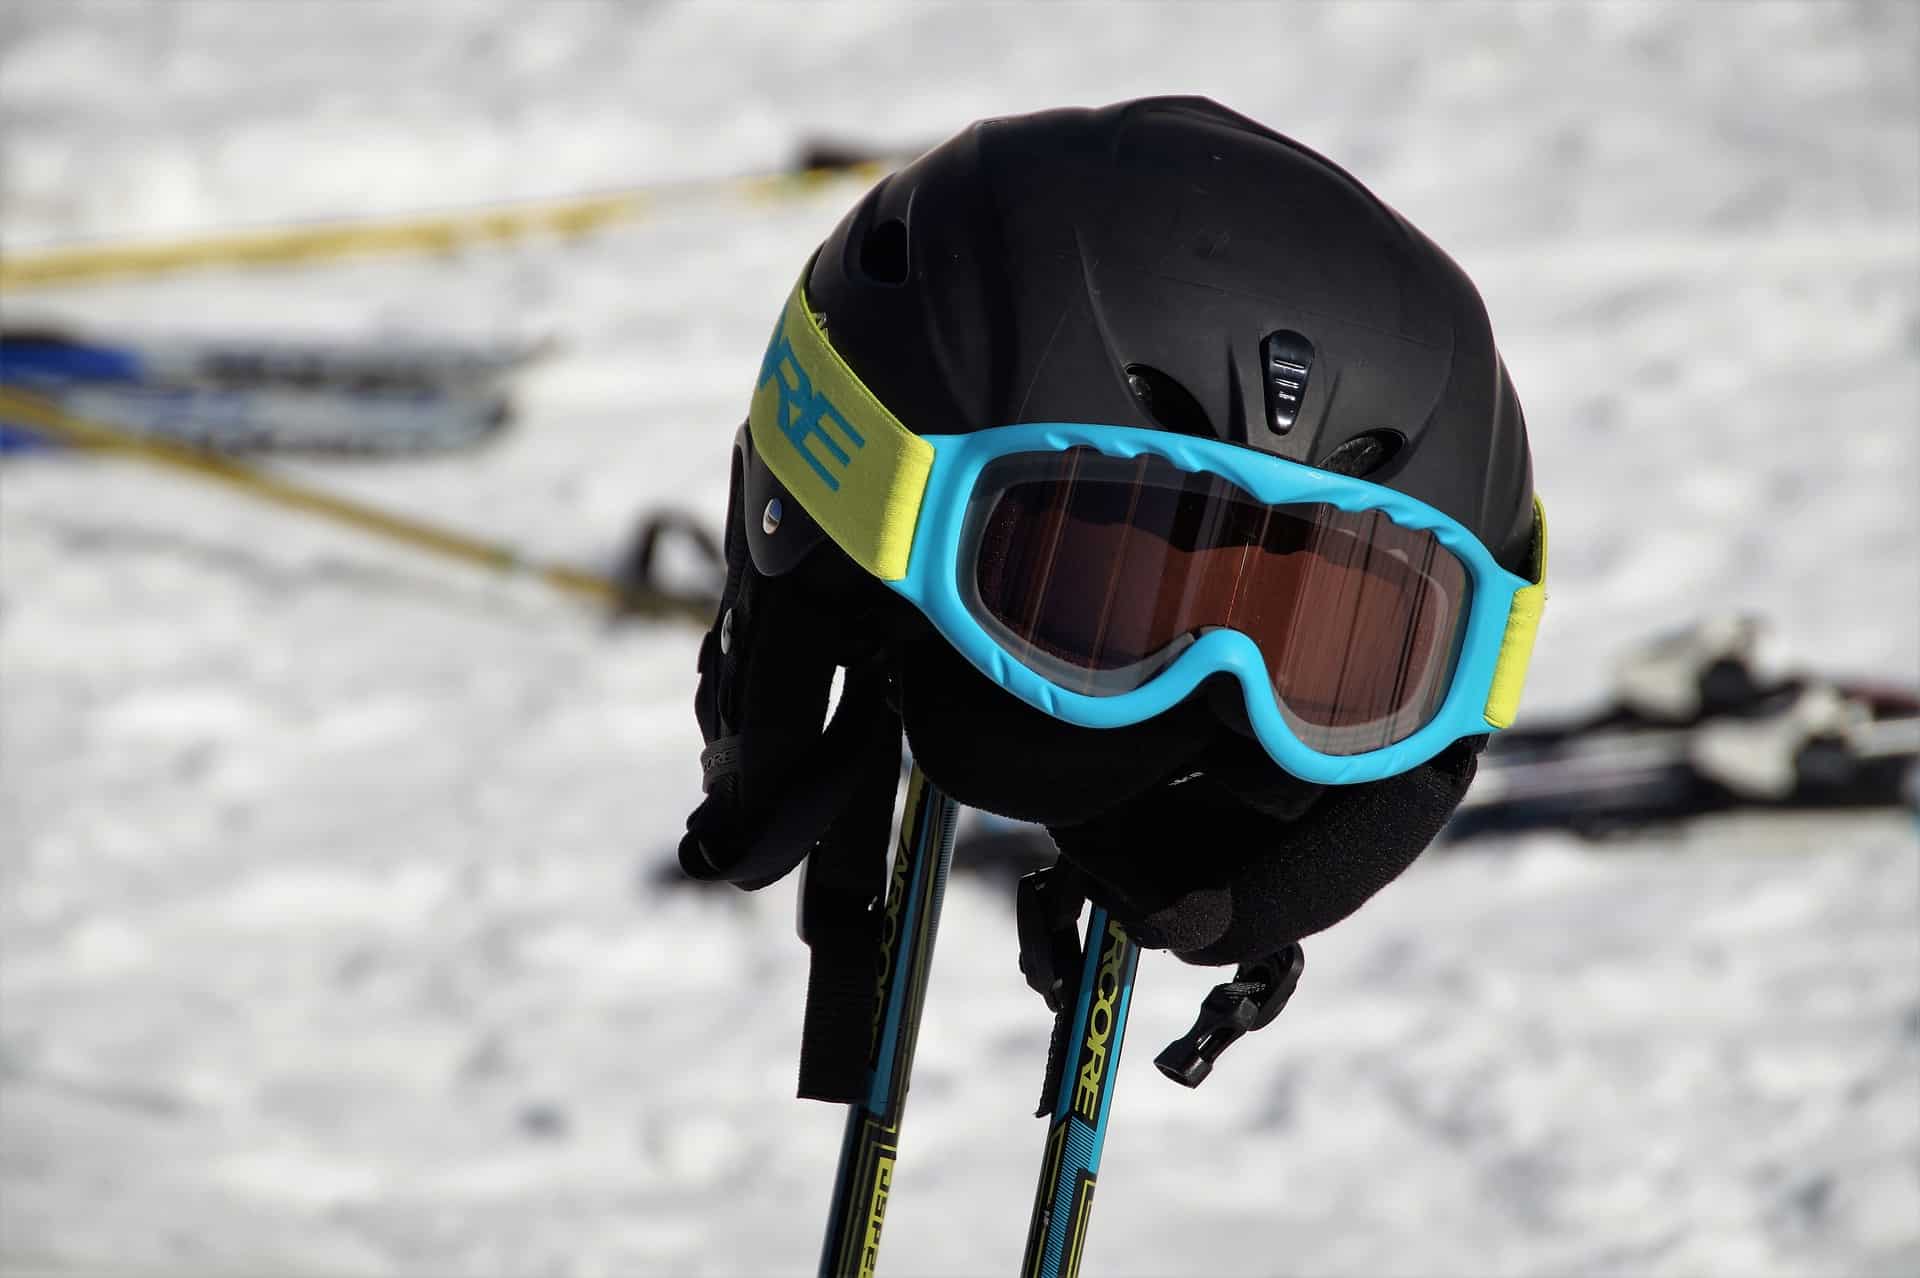 Protective ski accessories – what should you not go to the slopes without?